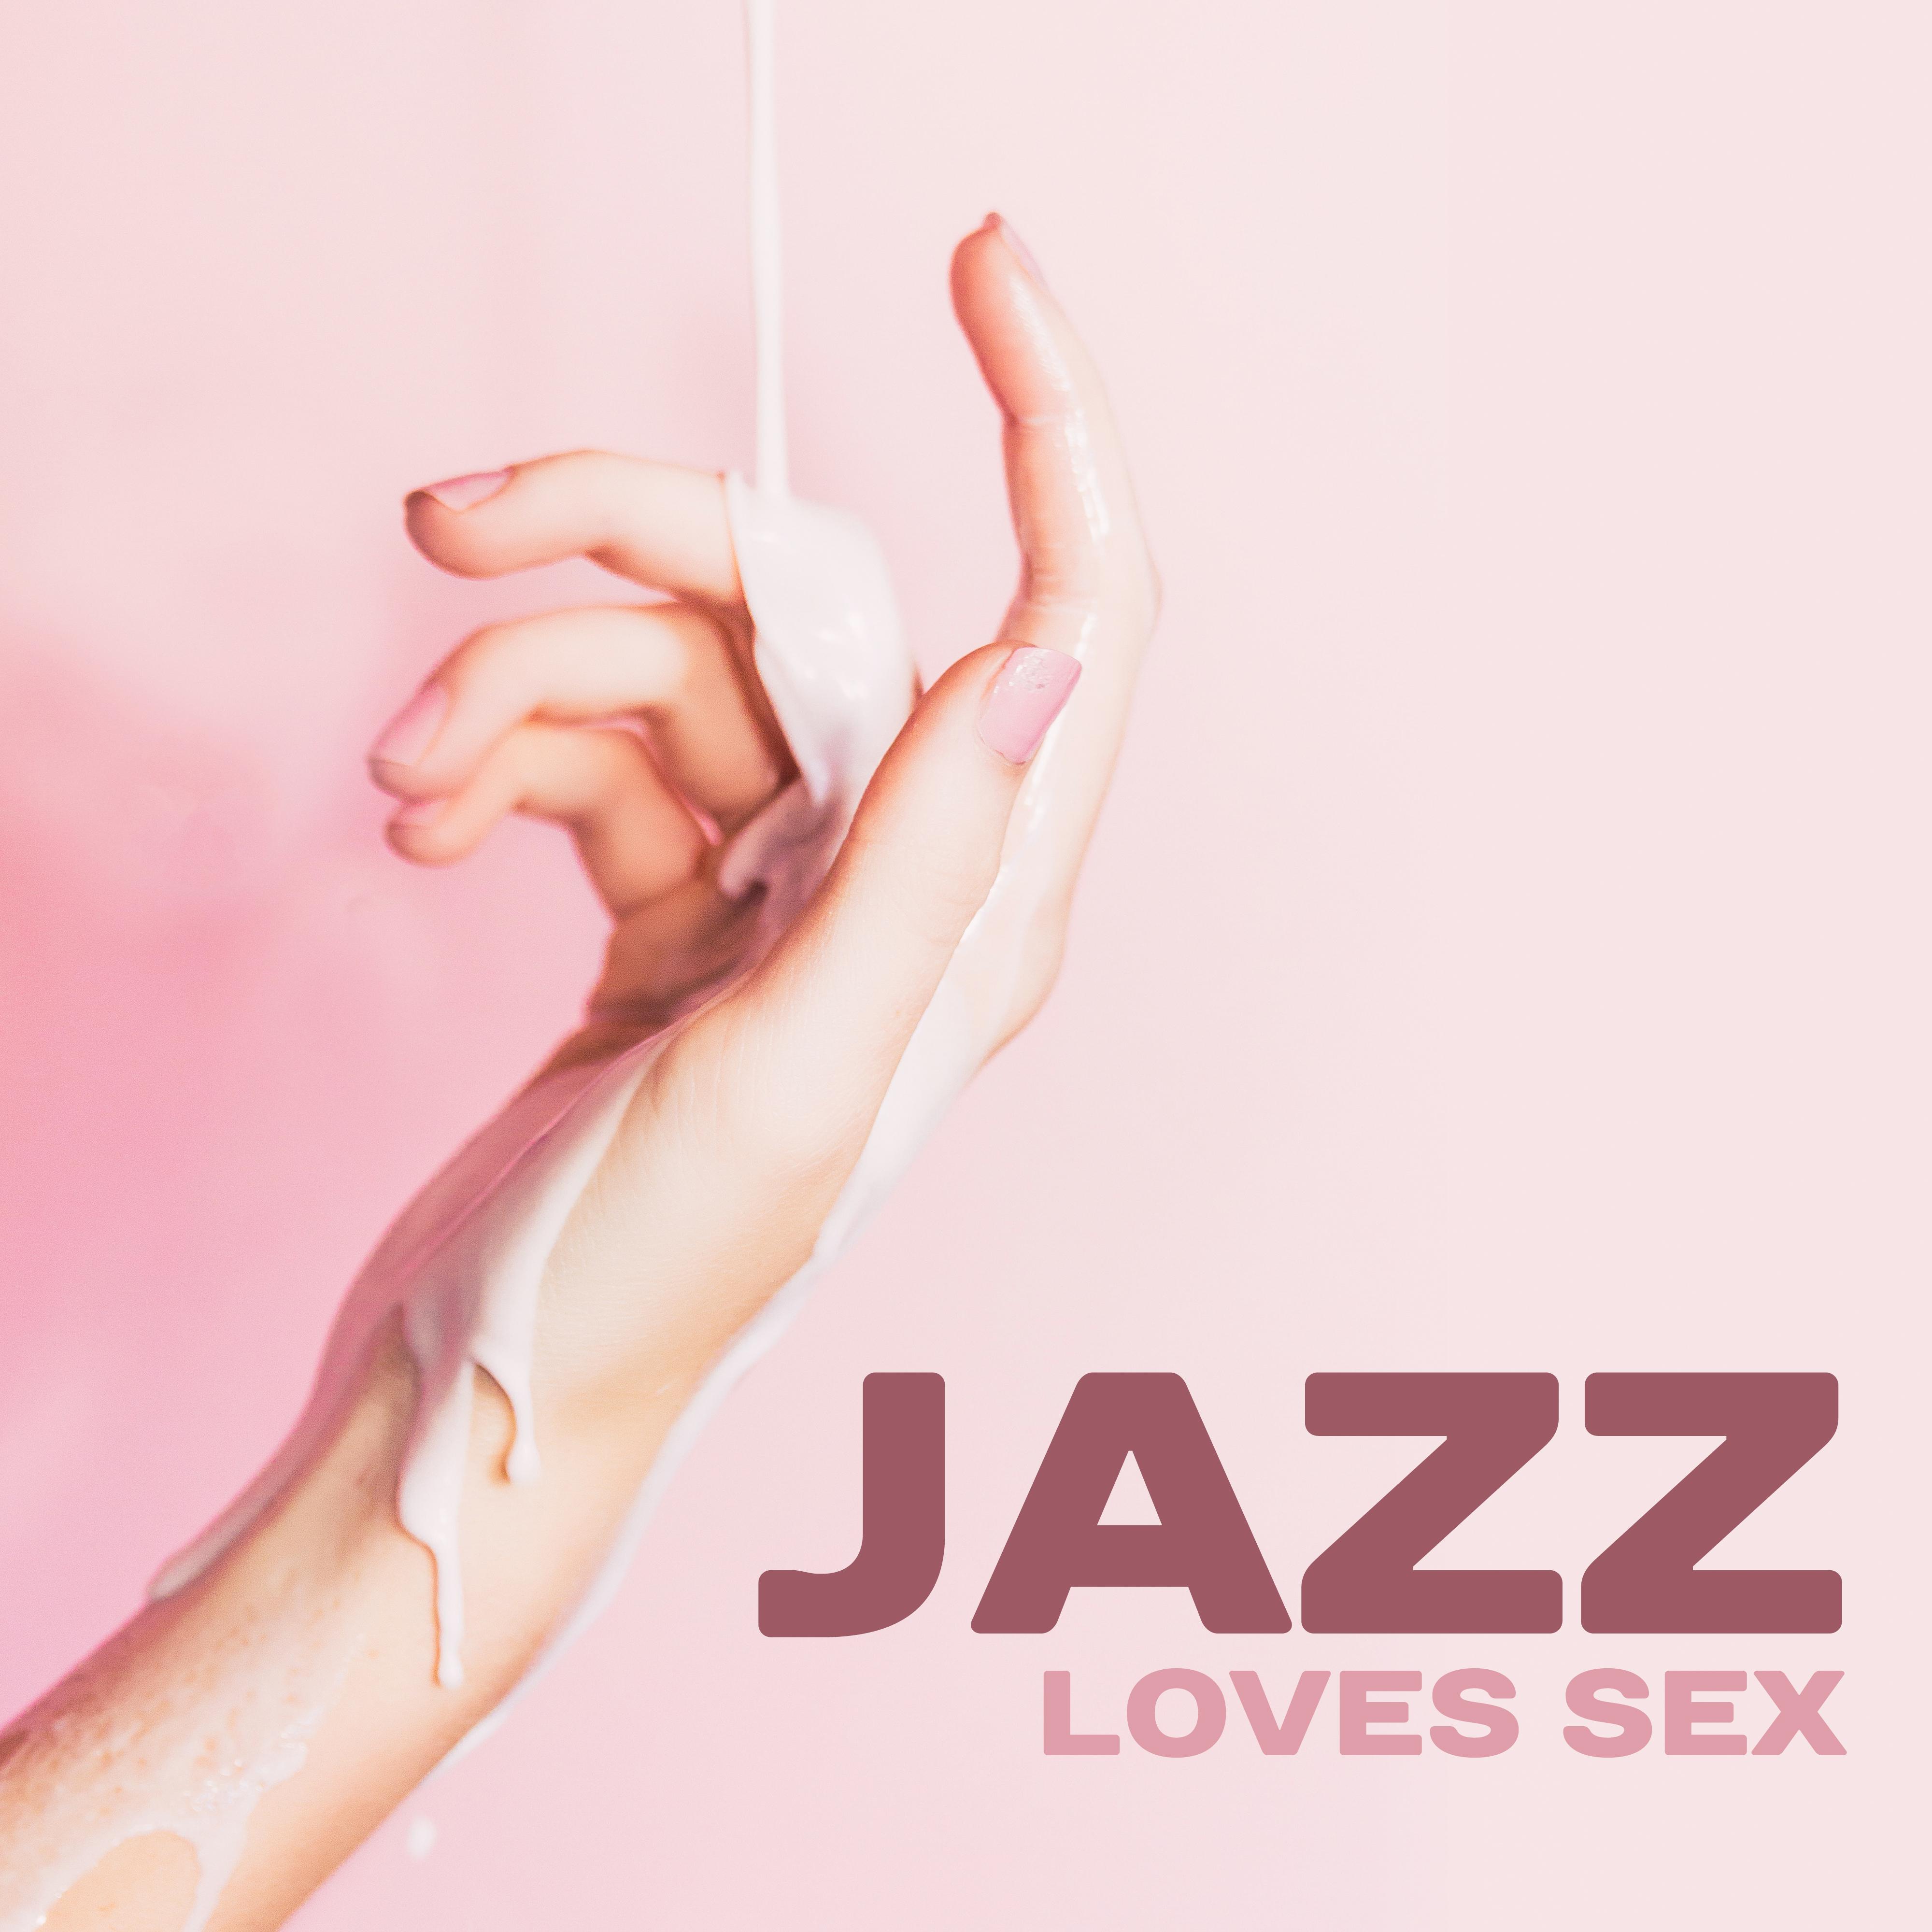 Jazz Loves  Instrumental Songs for Making Love, Deep Penetration, Orgasm for Two, Erotic Jazz, Sensual Night